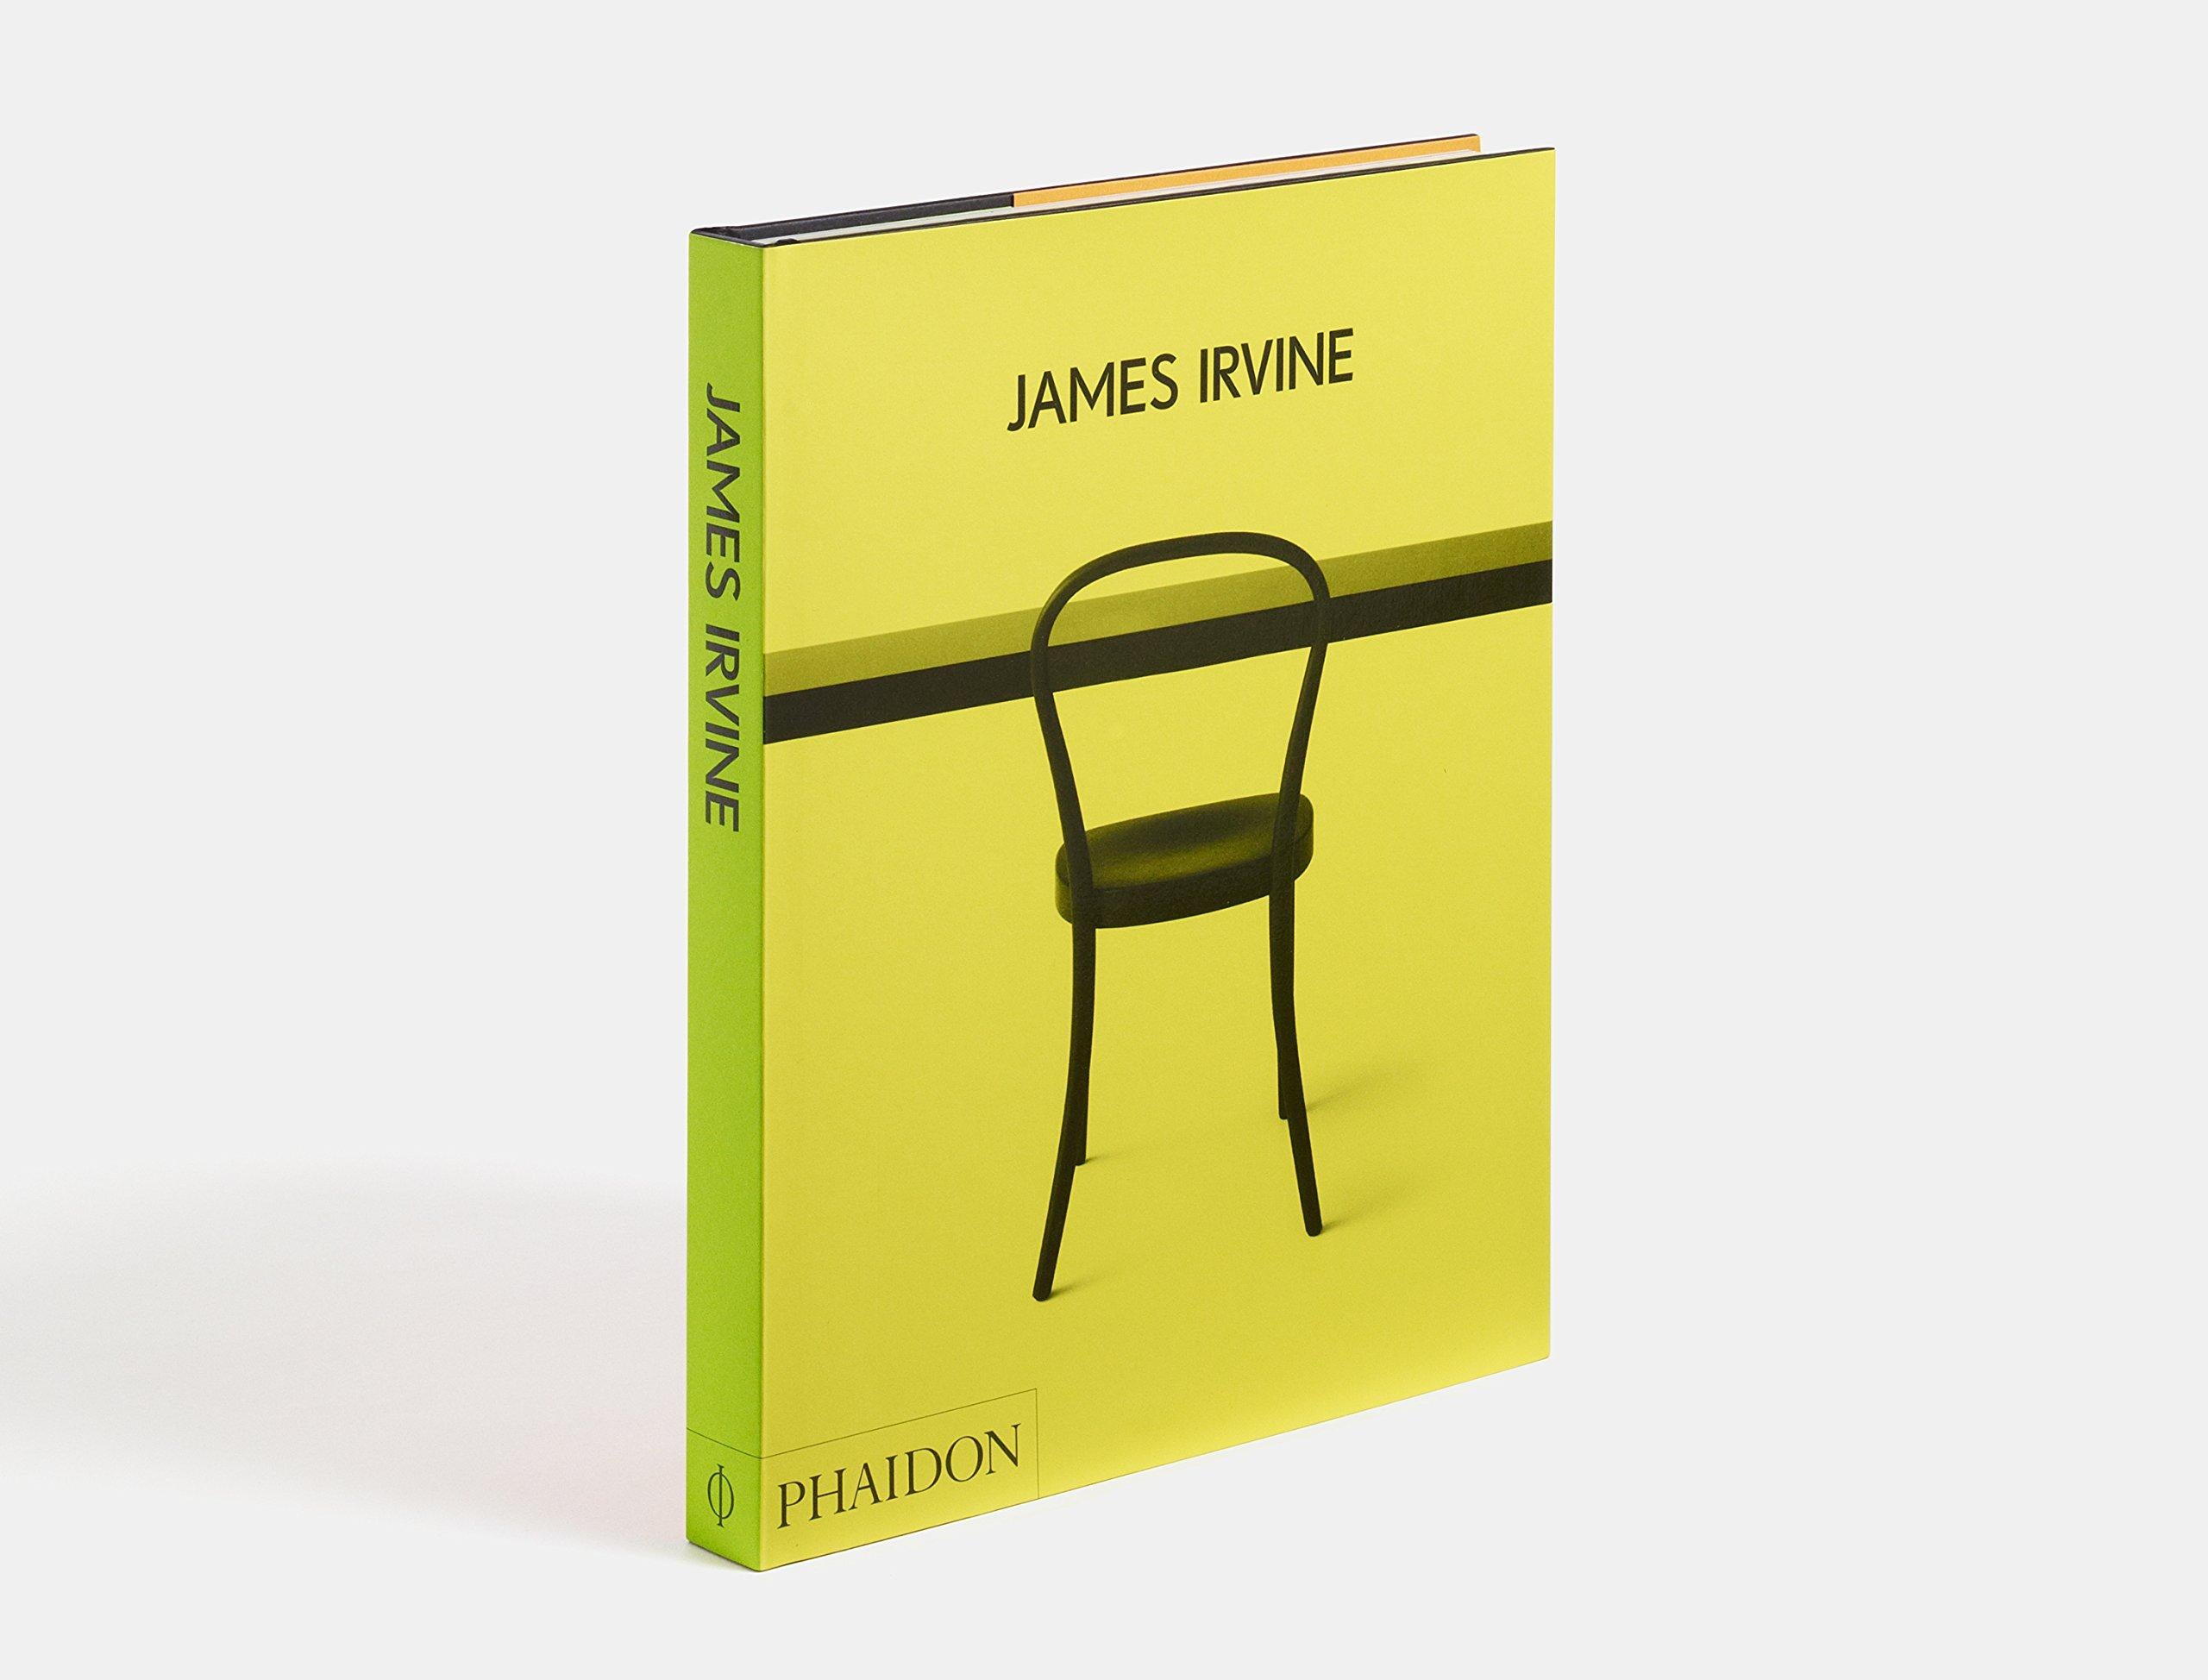 James Irvine by Deyan Sudjic, Jasper Morrison, Francesca Picchi et al.
In stock in Los Angeles

A complete monograph on the work of the influential British-born, Milan-based furniture and product designer James Irvine (1958-2013).

James Irvine